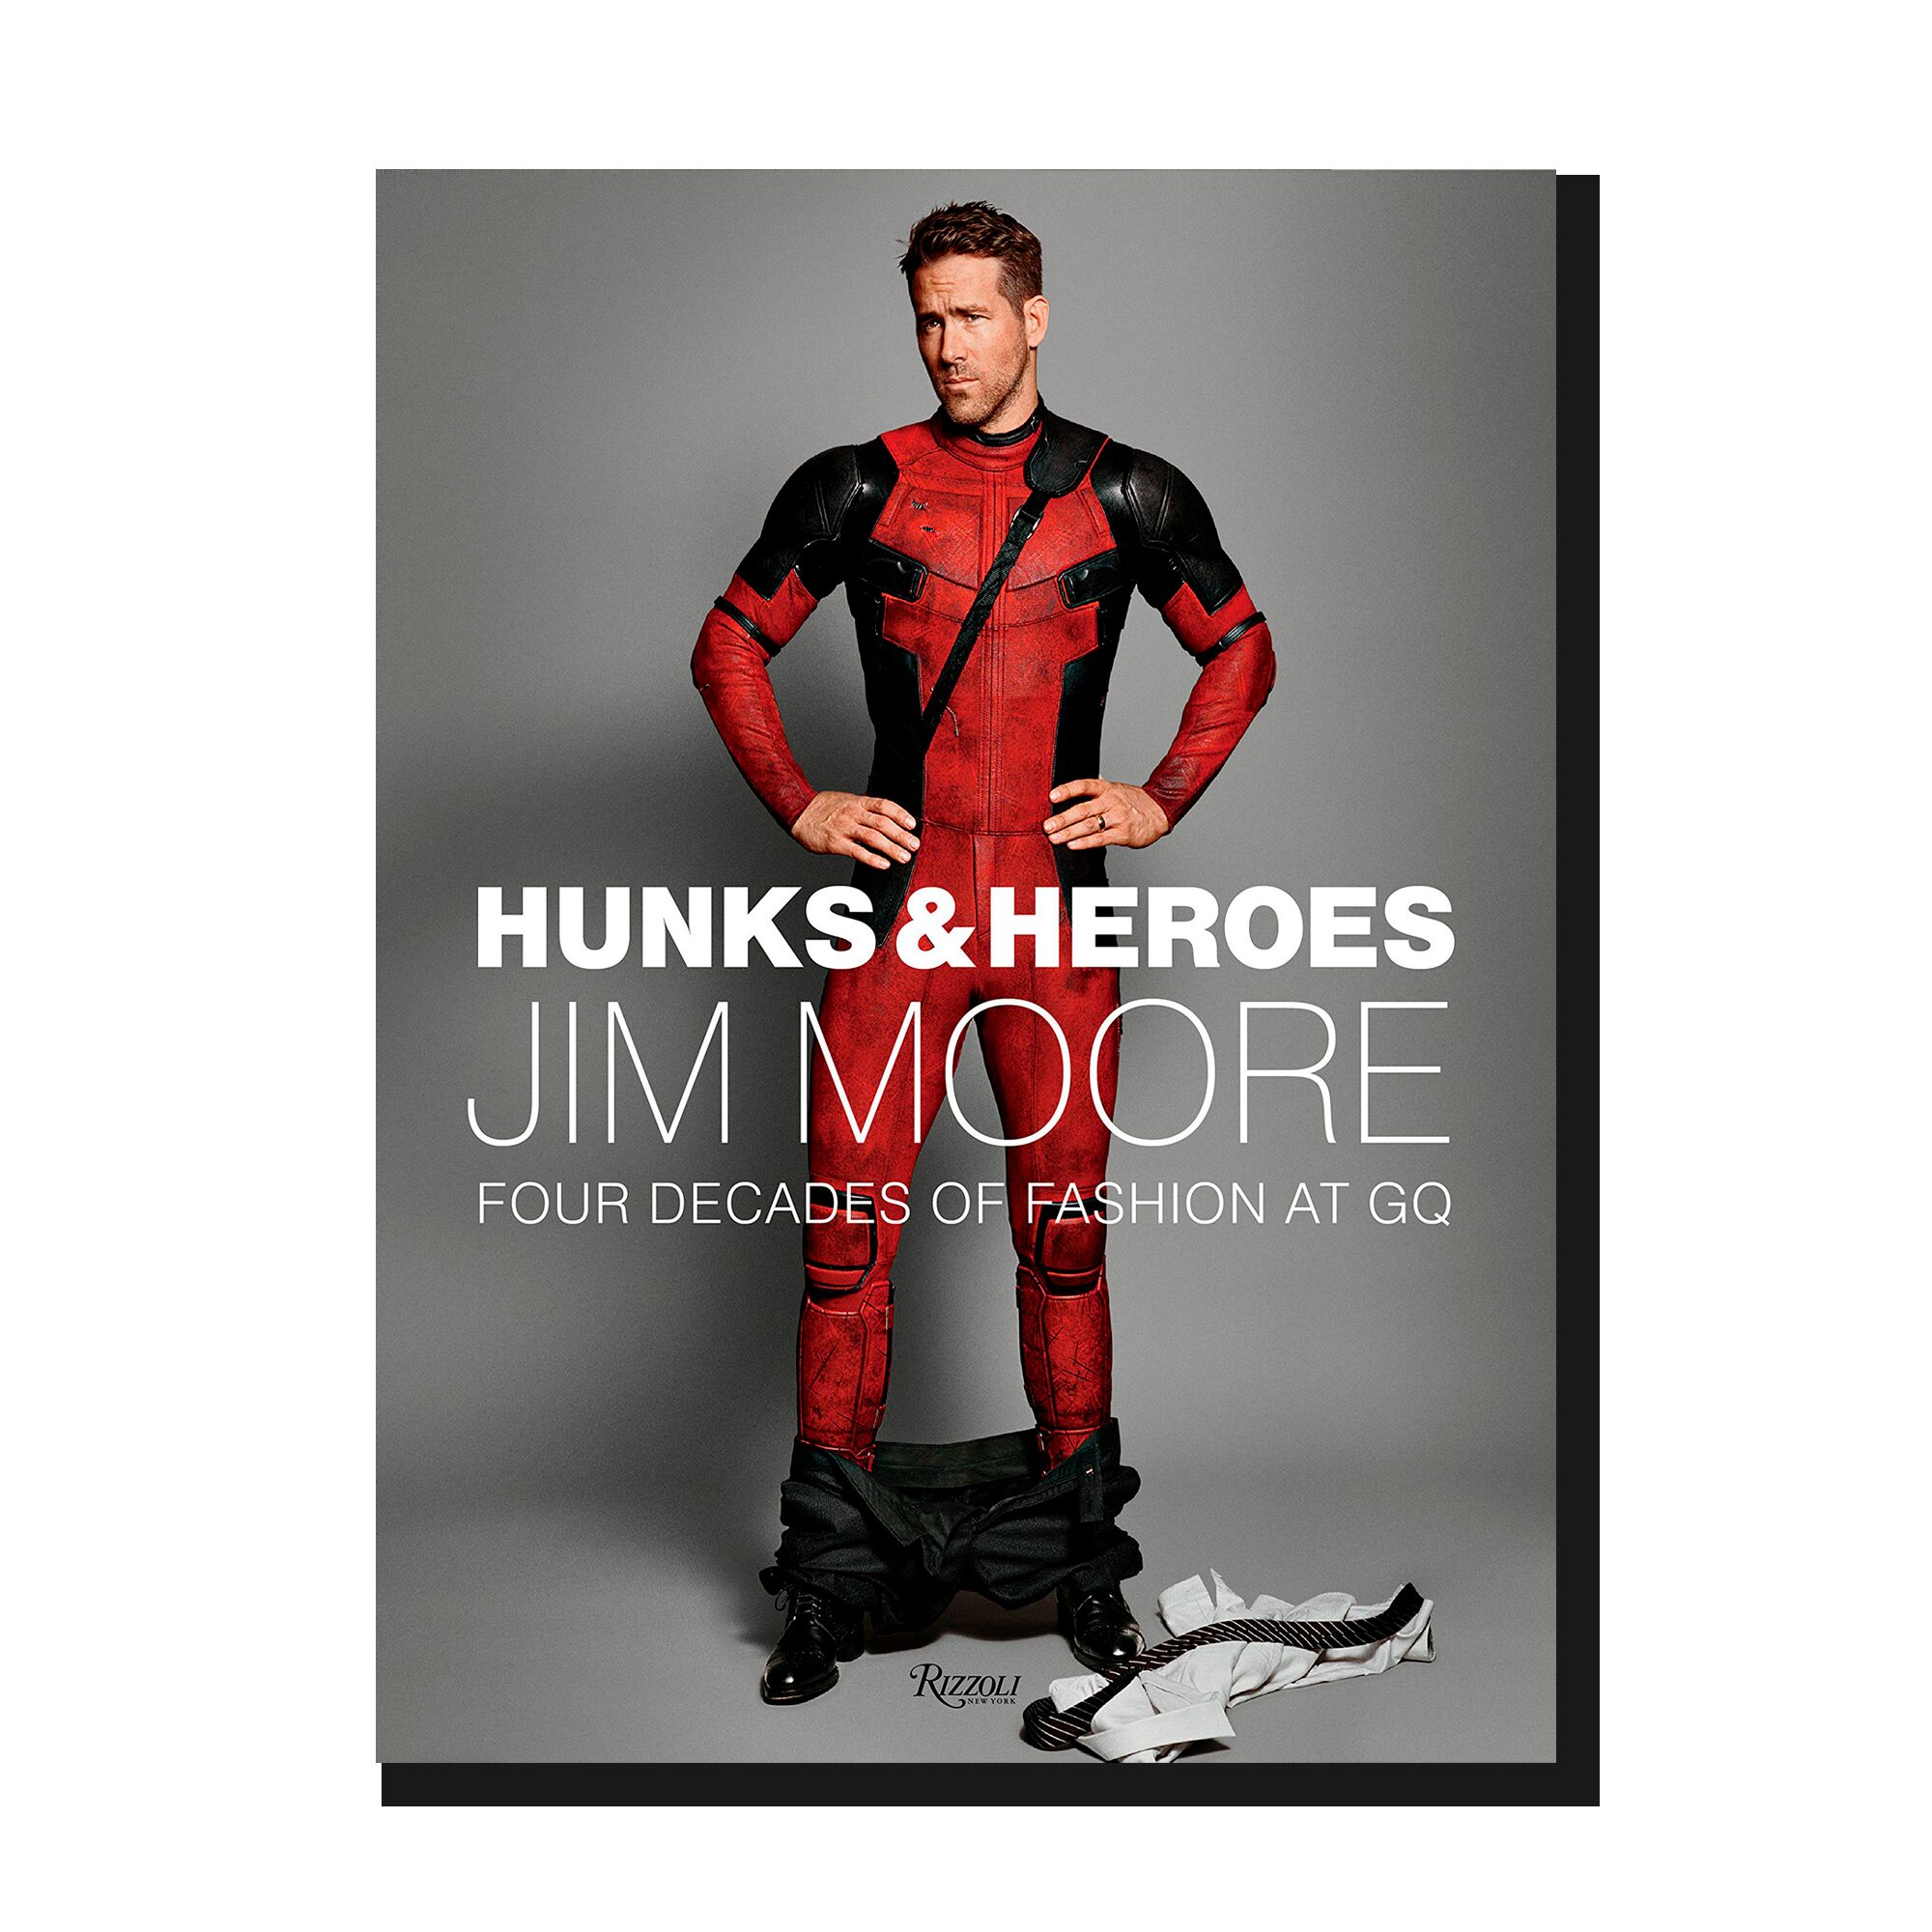 Hunks & Heroes: Four Decades of Fashion at GQ